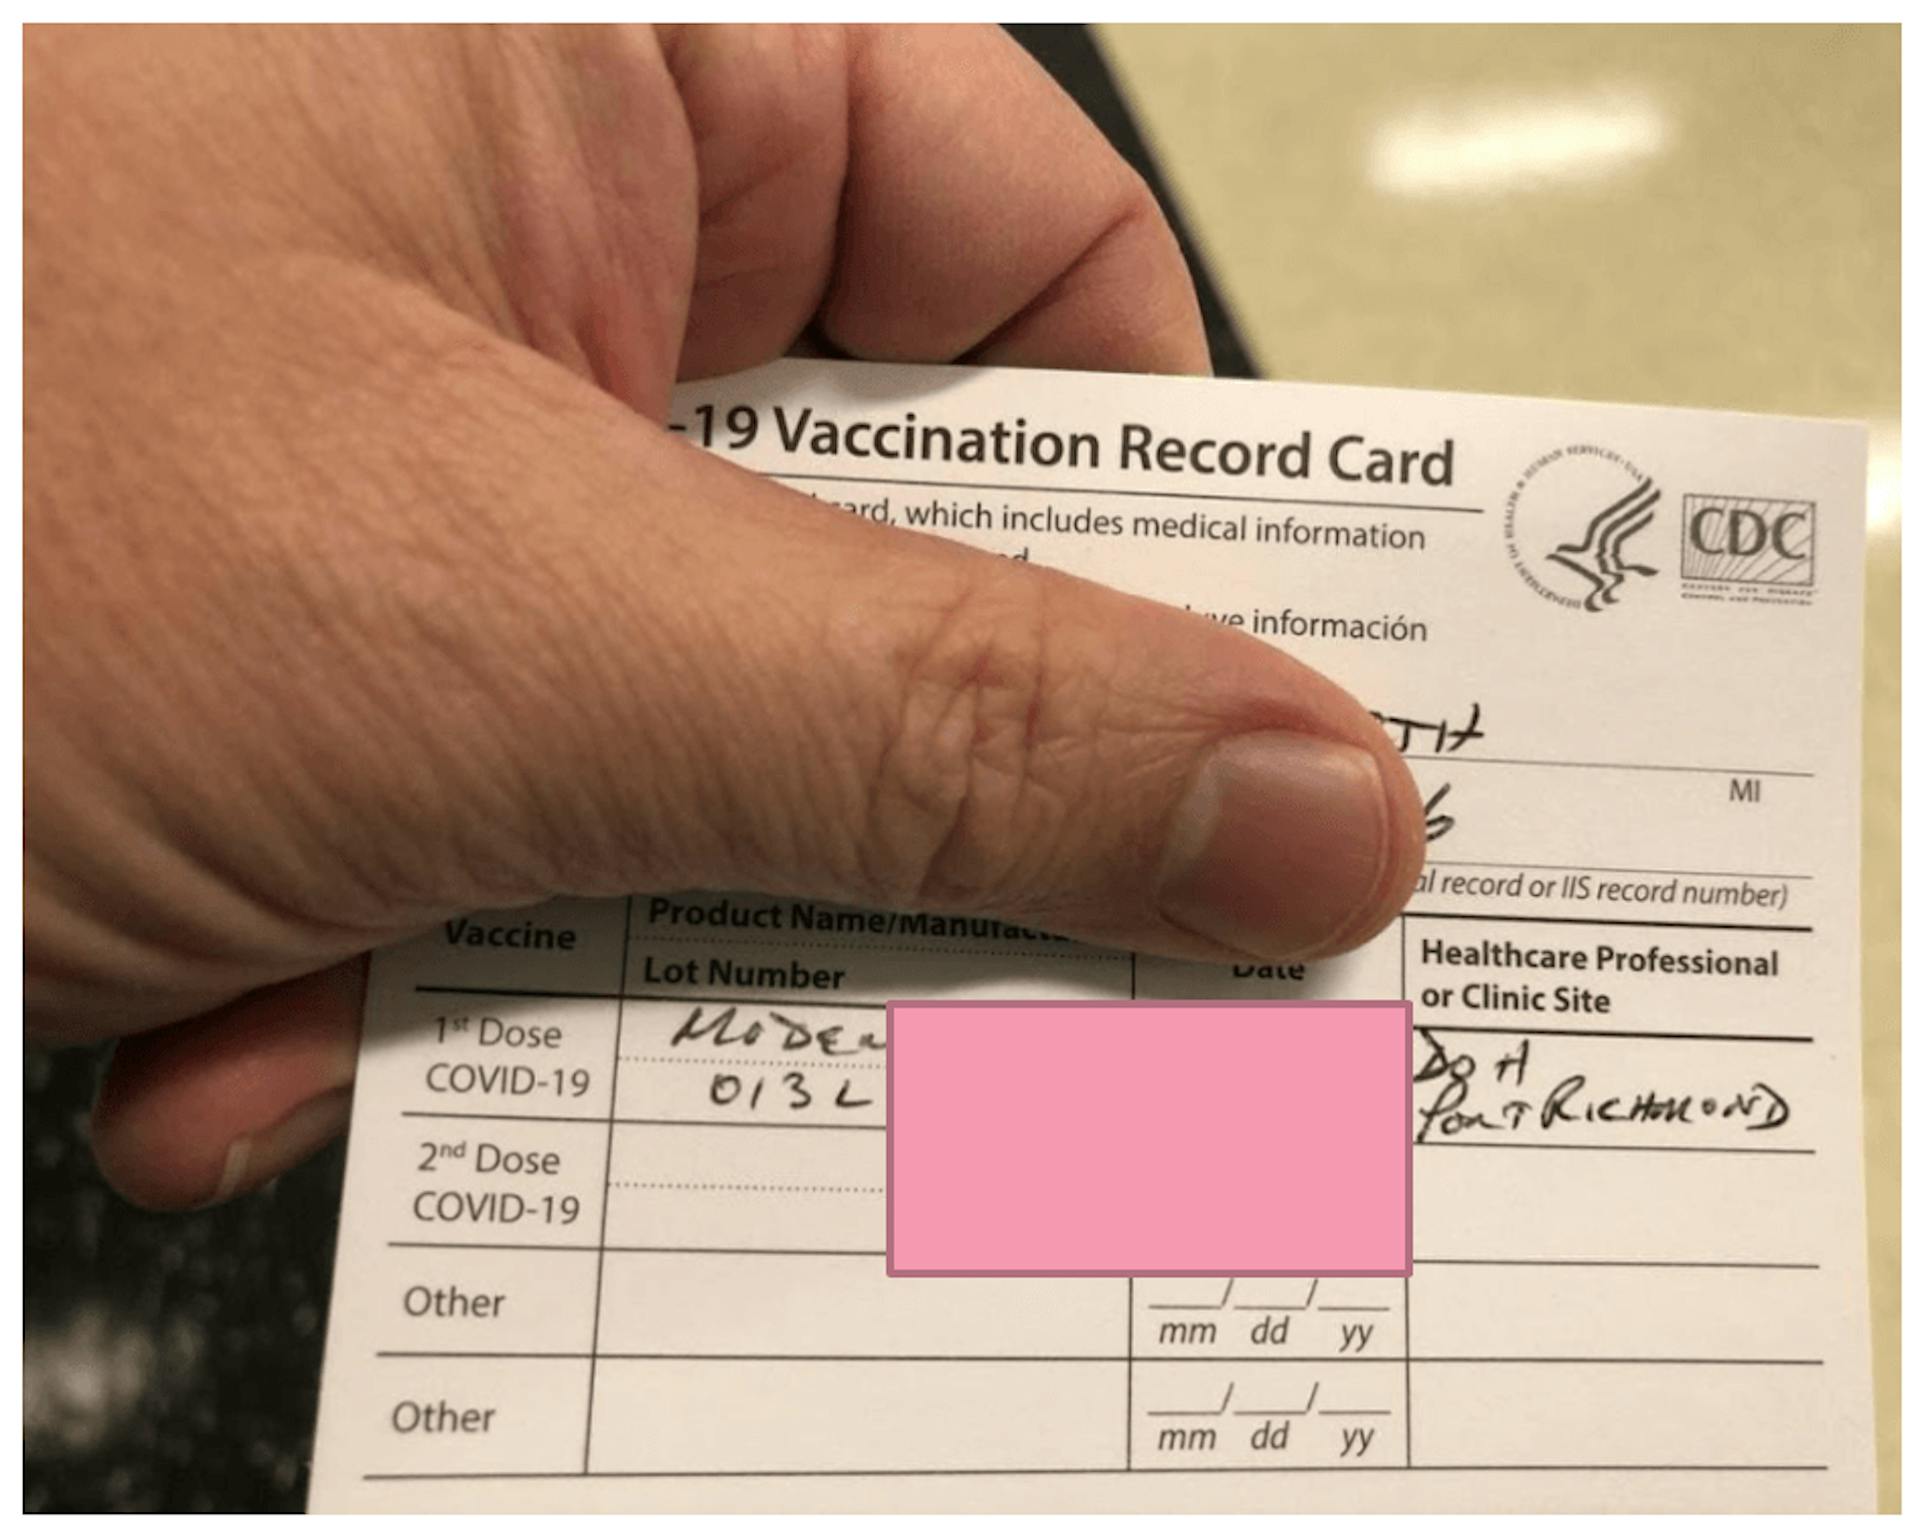 A fake vaccination record from the “CDC- Centers for Disease control and prevention” – part of the U.S. Government’s Department of Health & Human Services.